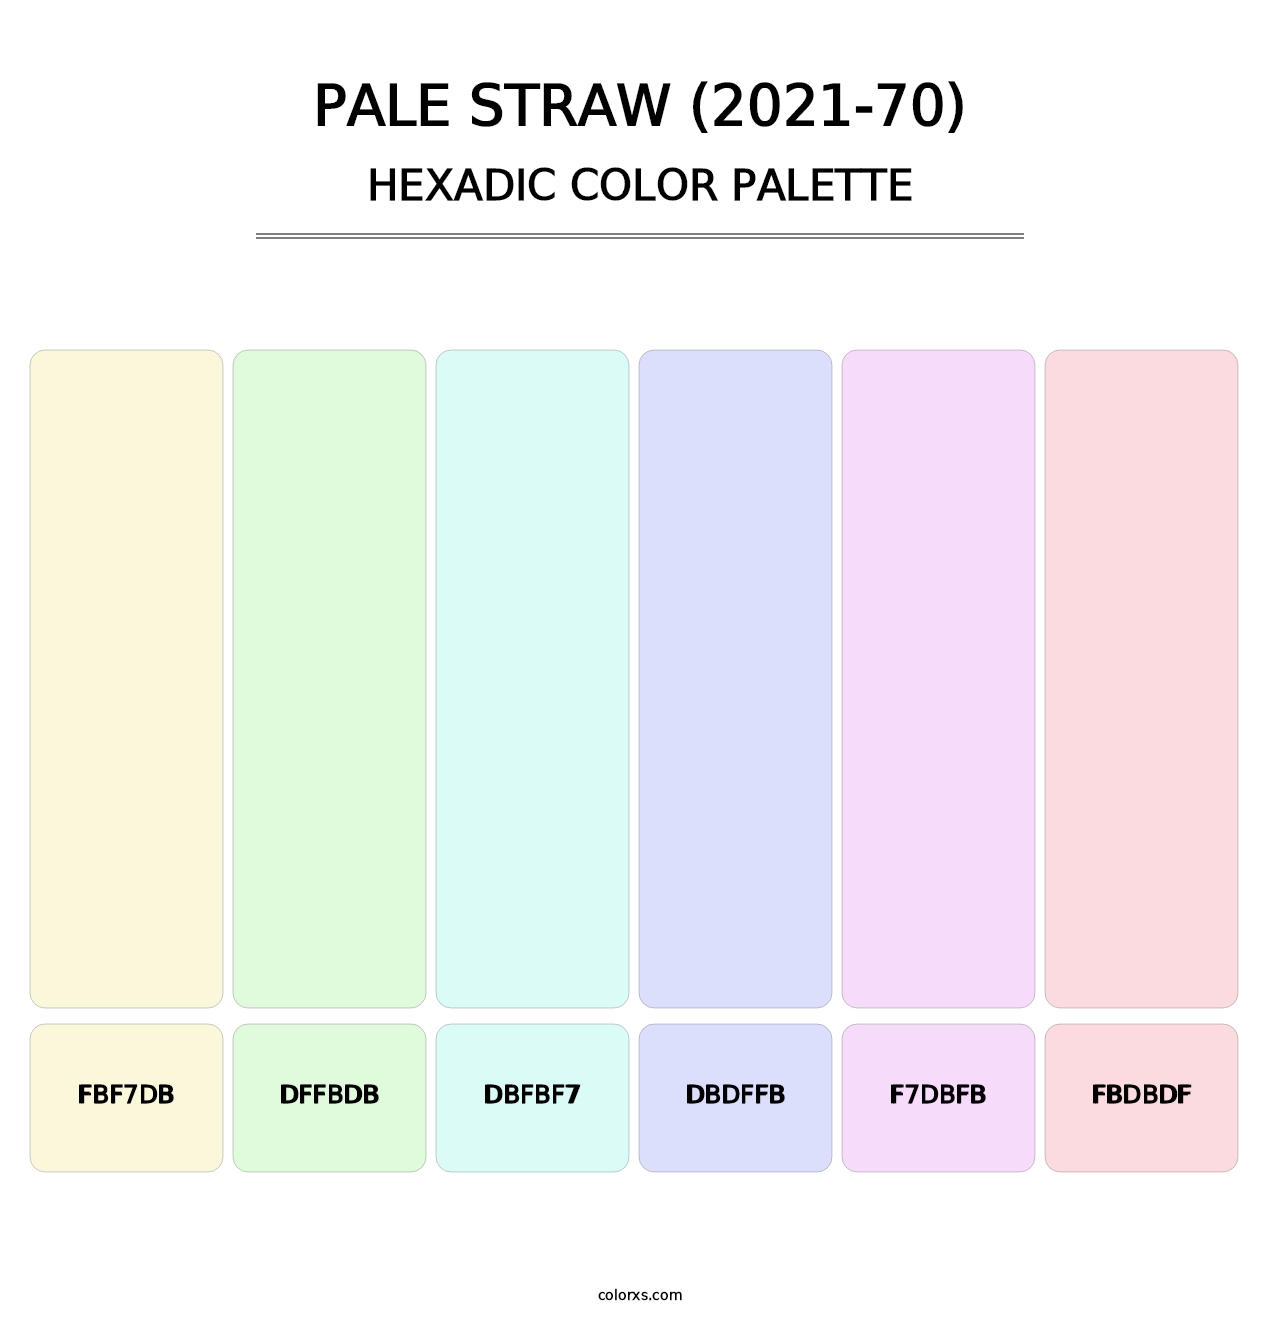 Pale Straw (2021-70) - Hexadic Color Palette